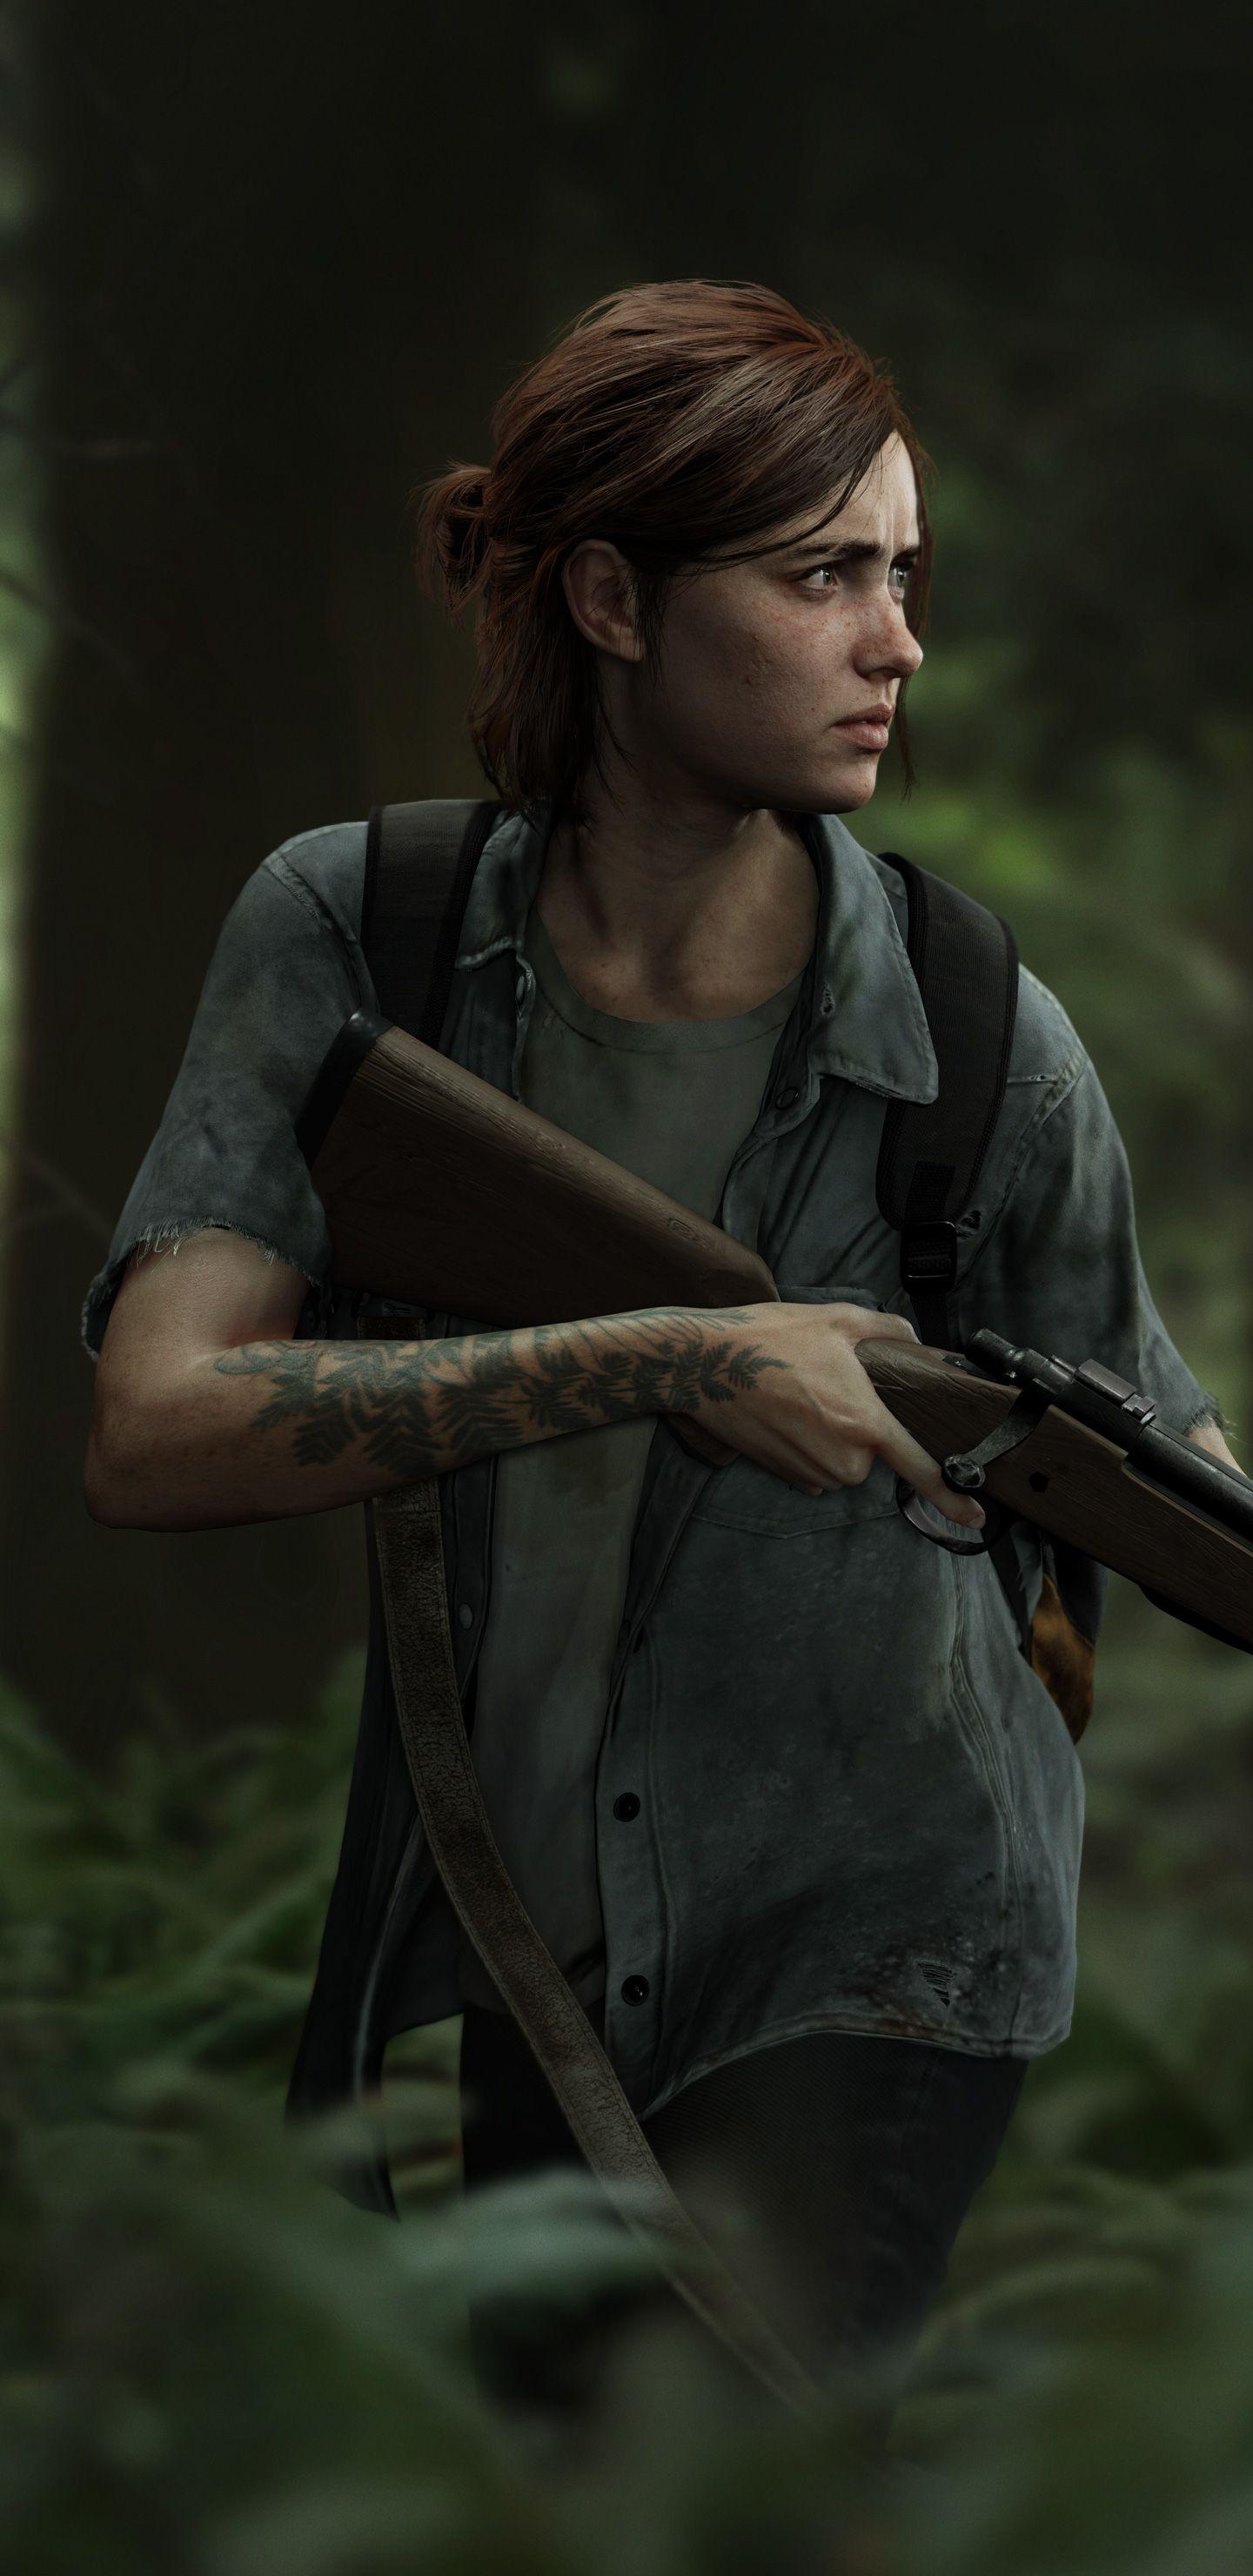 Ellie from The Last of Us Part II (1440x2960) #Music